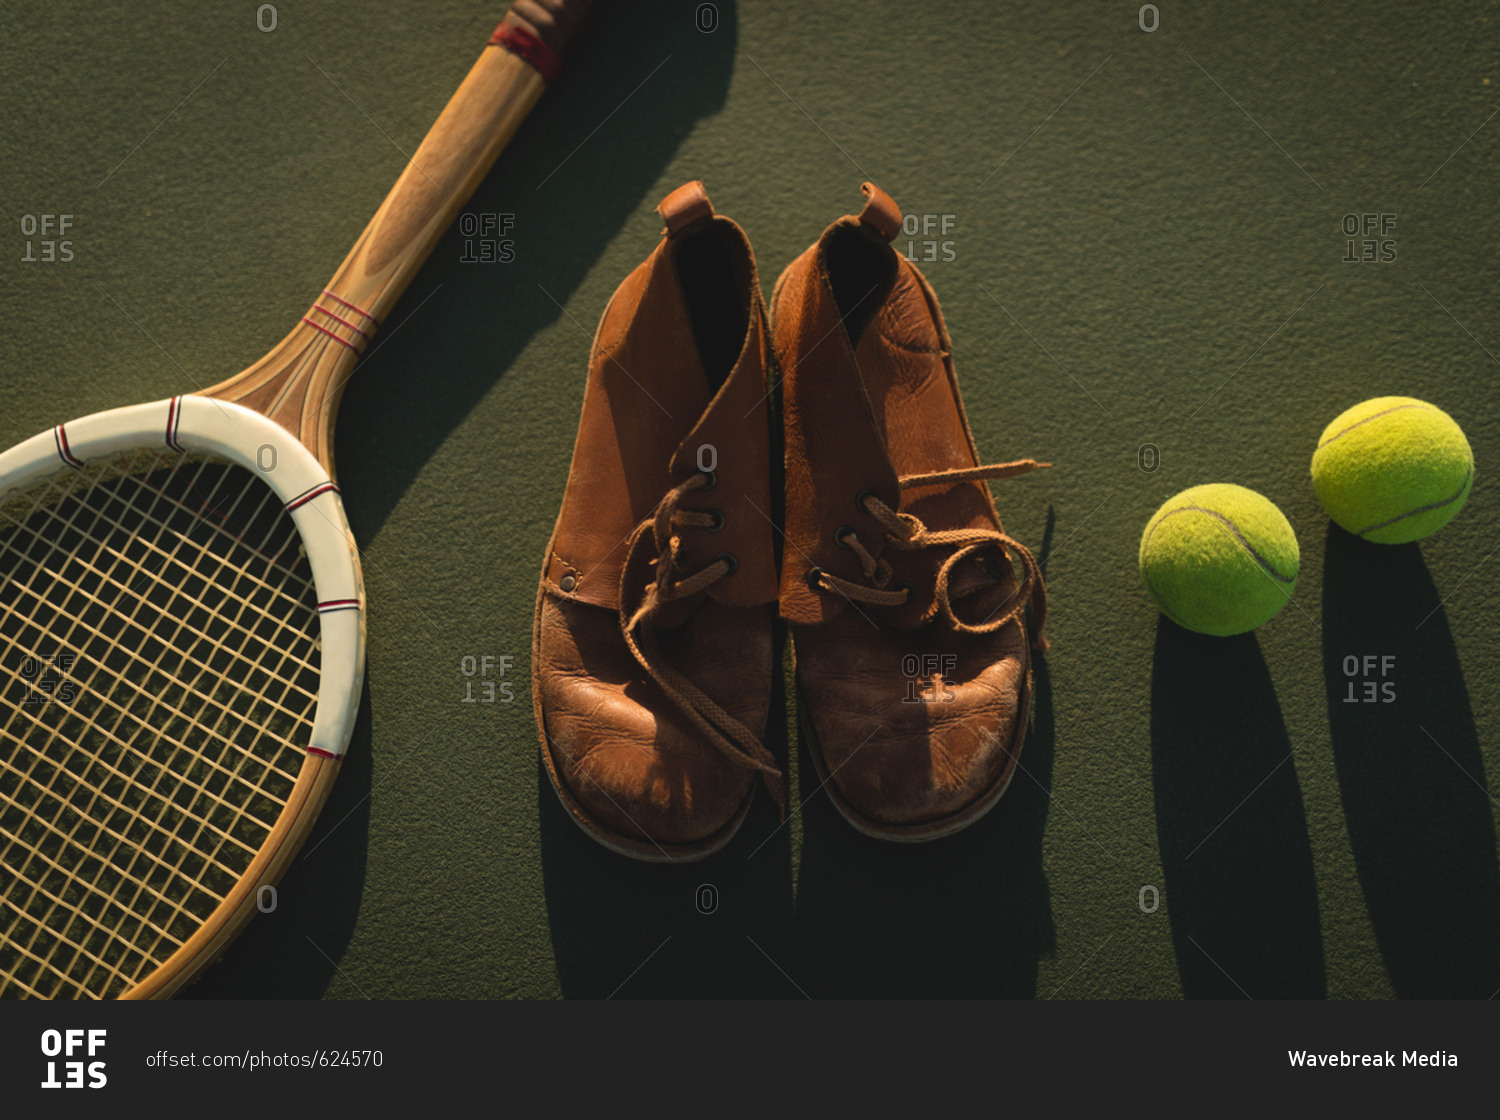 Close-up of tennis ball, sports shoes and racket in ground